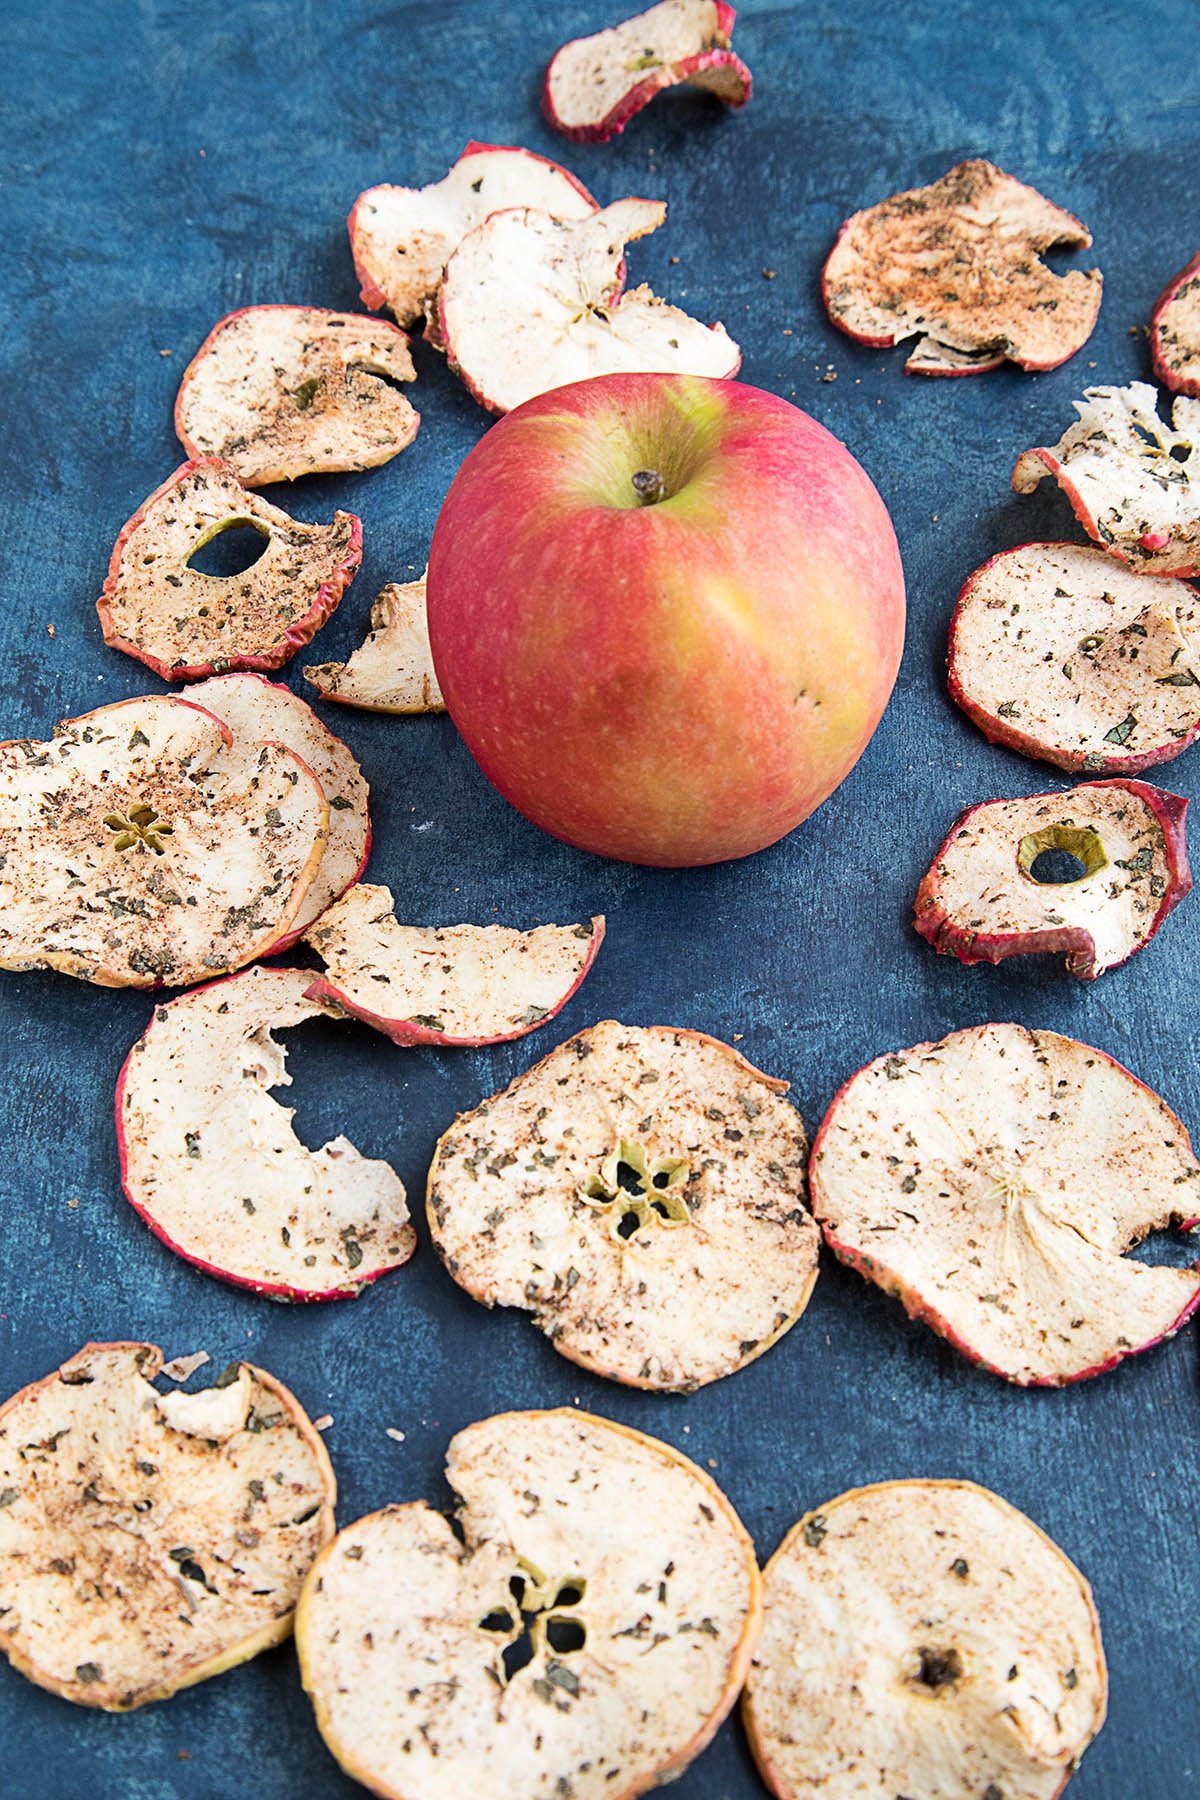 Spiced dried apple chips